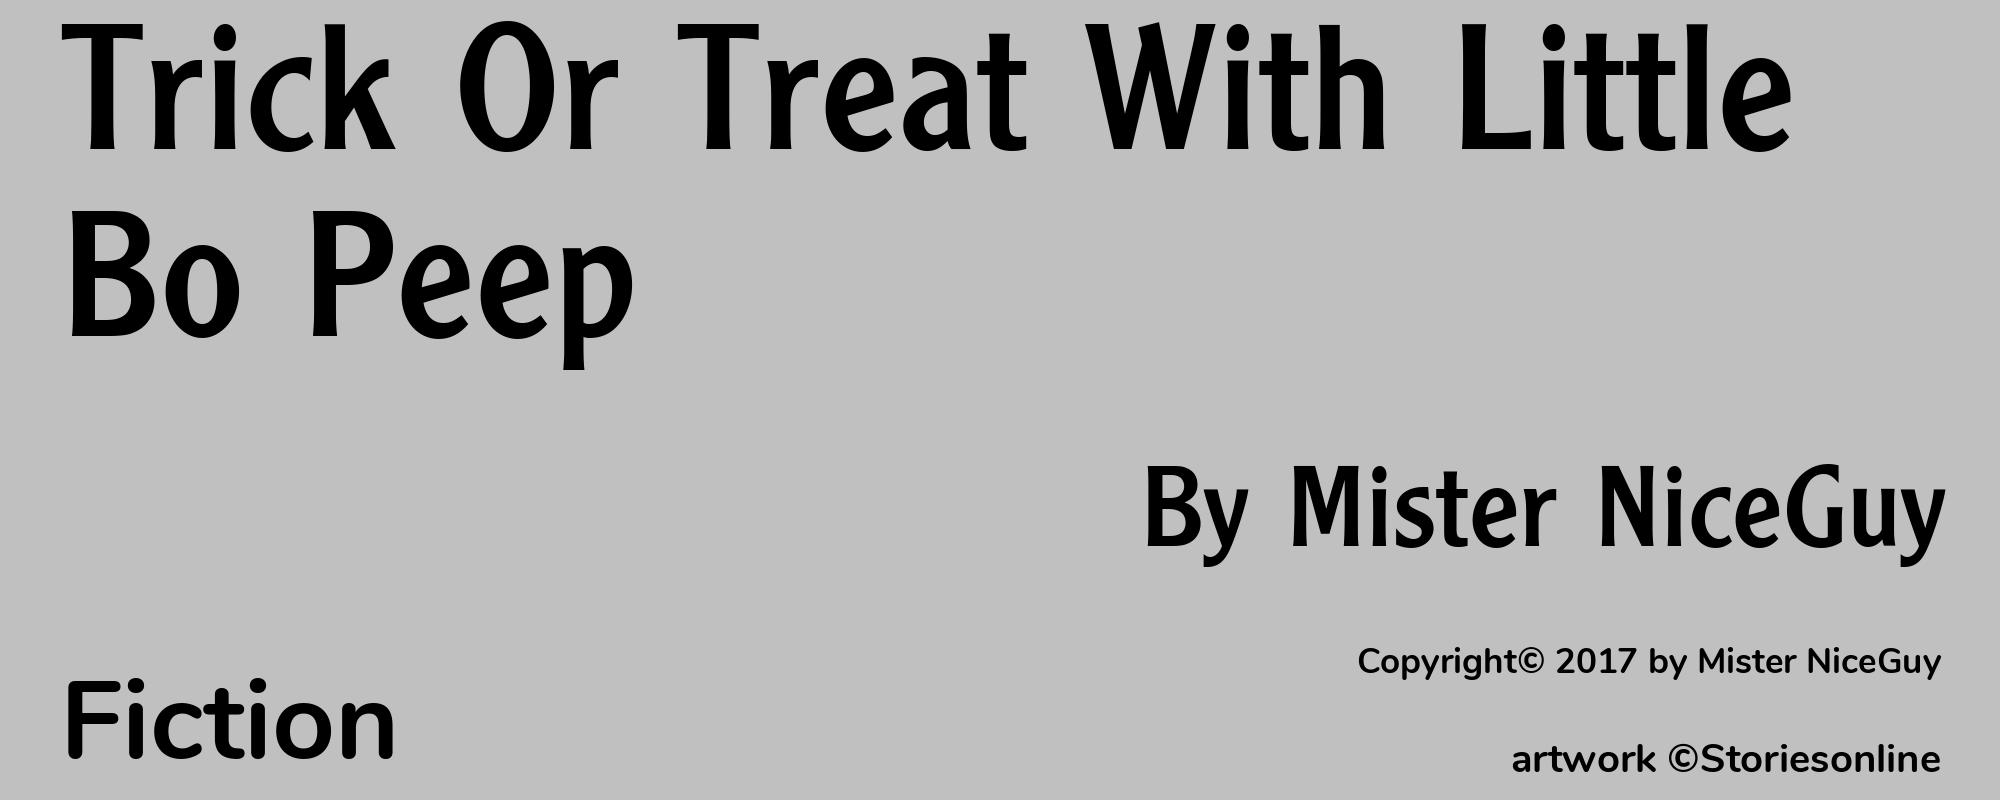 Trick Or Treat With Little Bo Peep - Cover